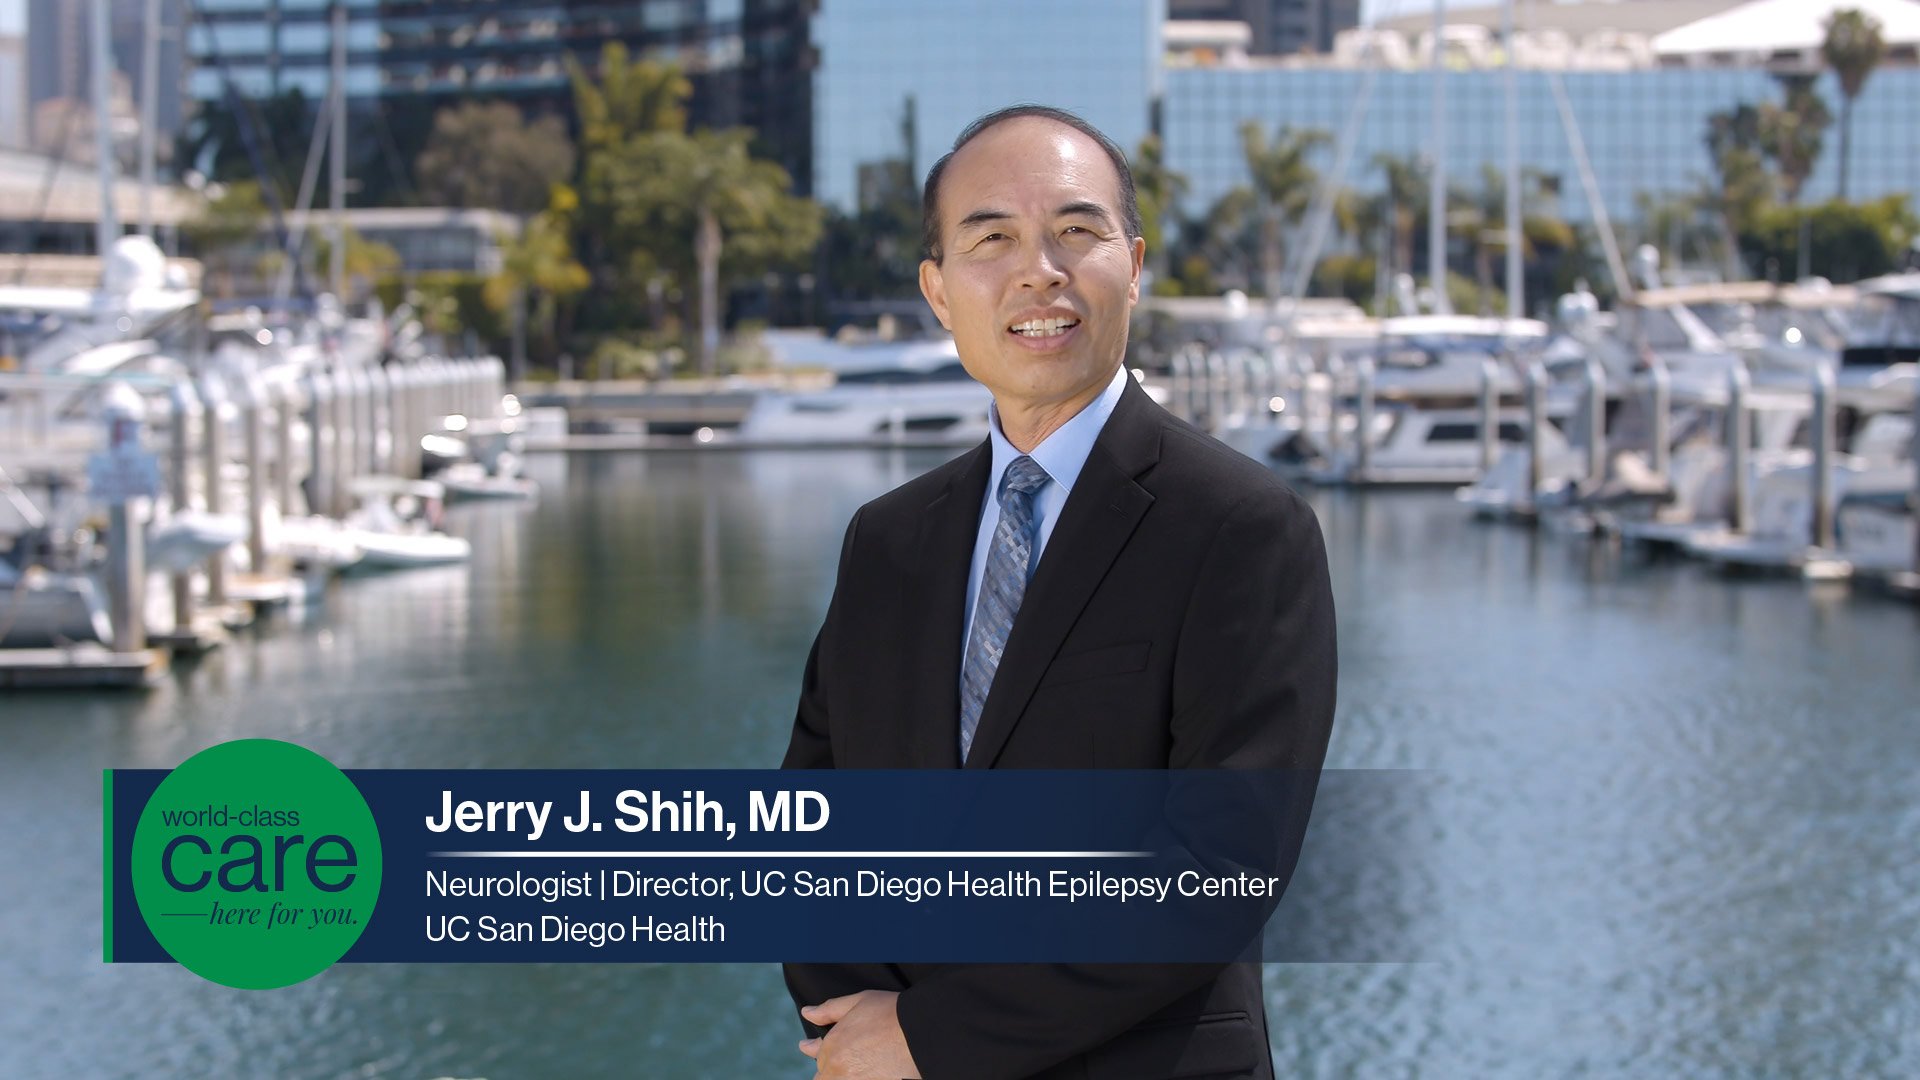 Dr. Jerry Shih, neurologist, shown with a graphic with the words "world-class care here for you"